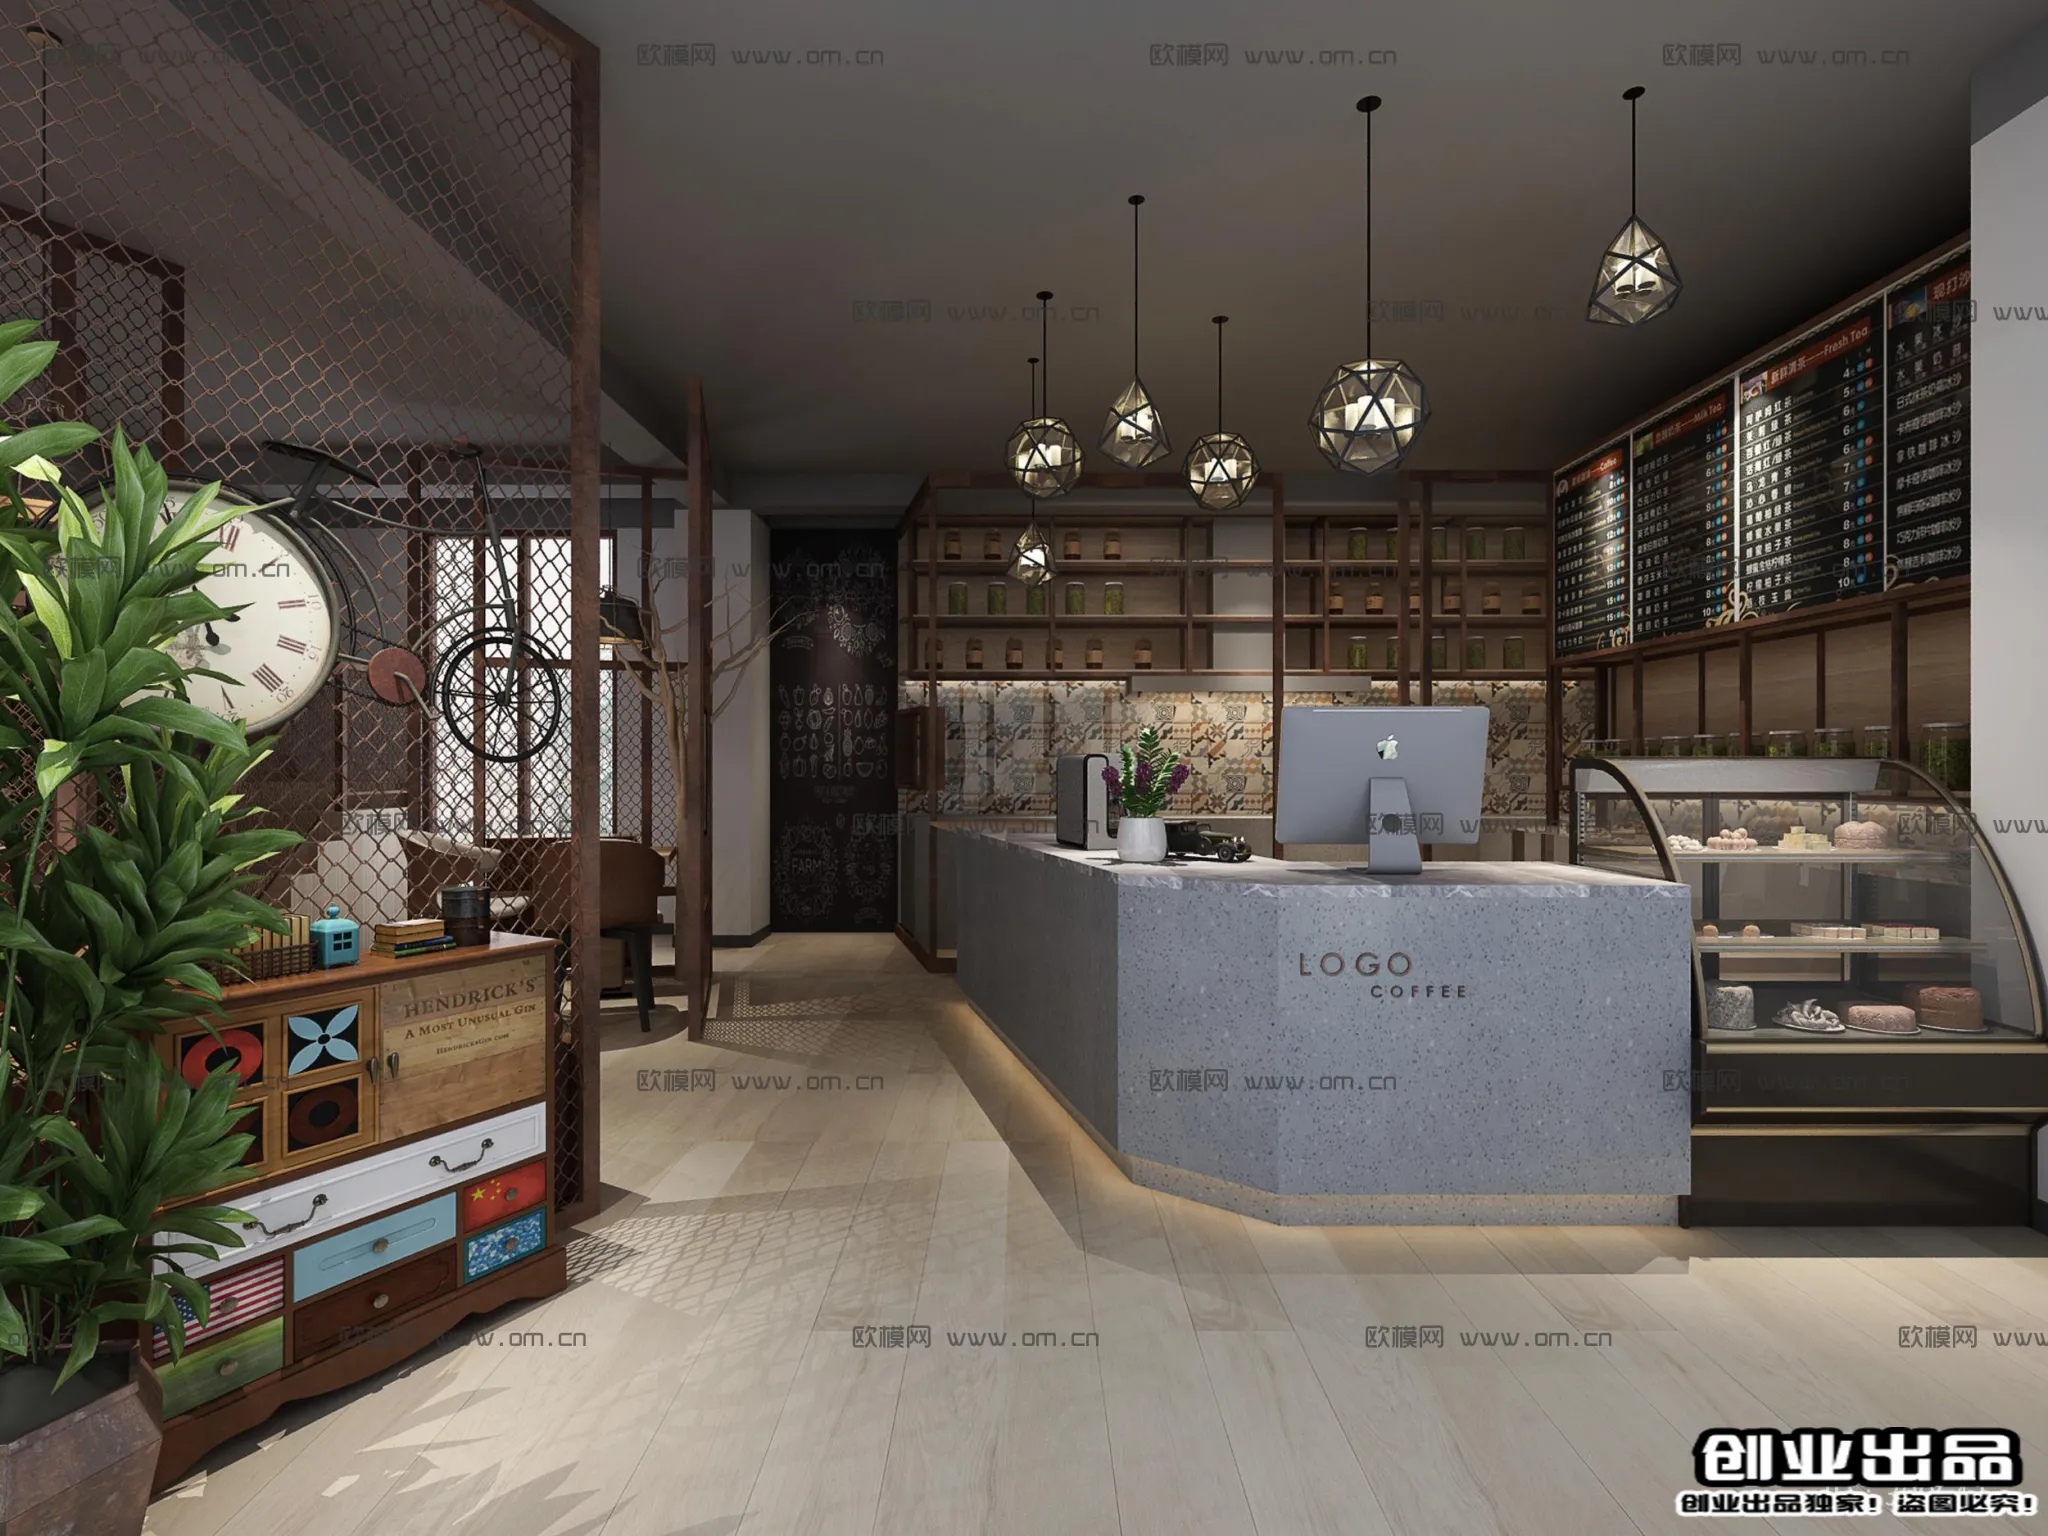 FASTFOOD STORE – 3D SCENES – 0052